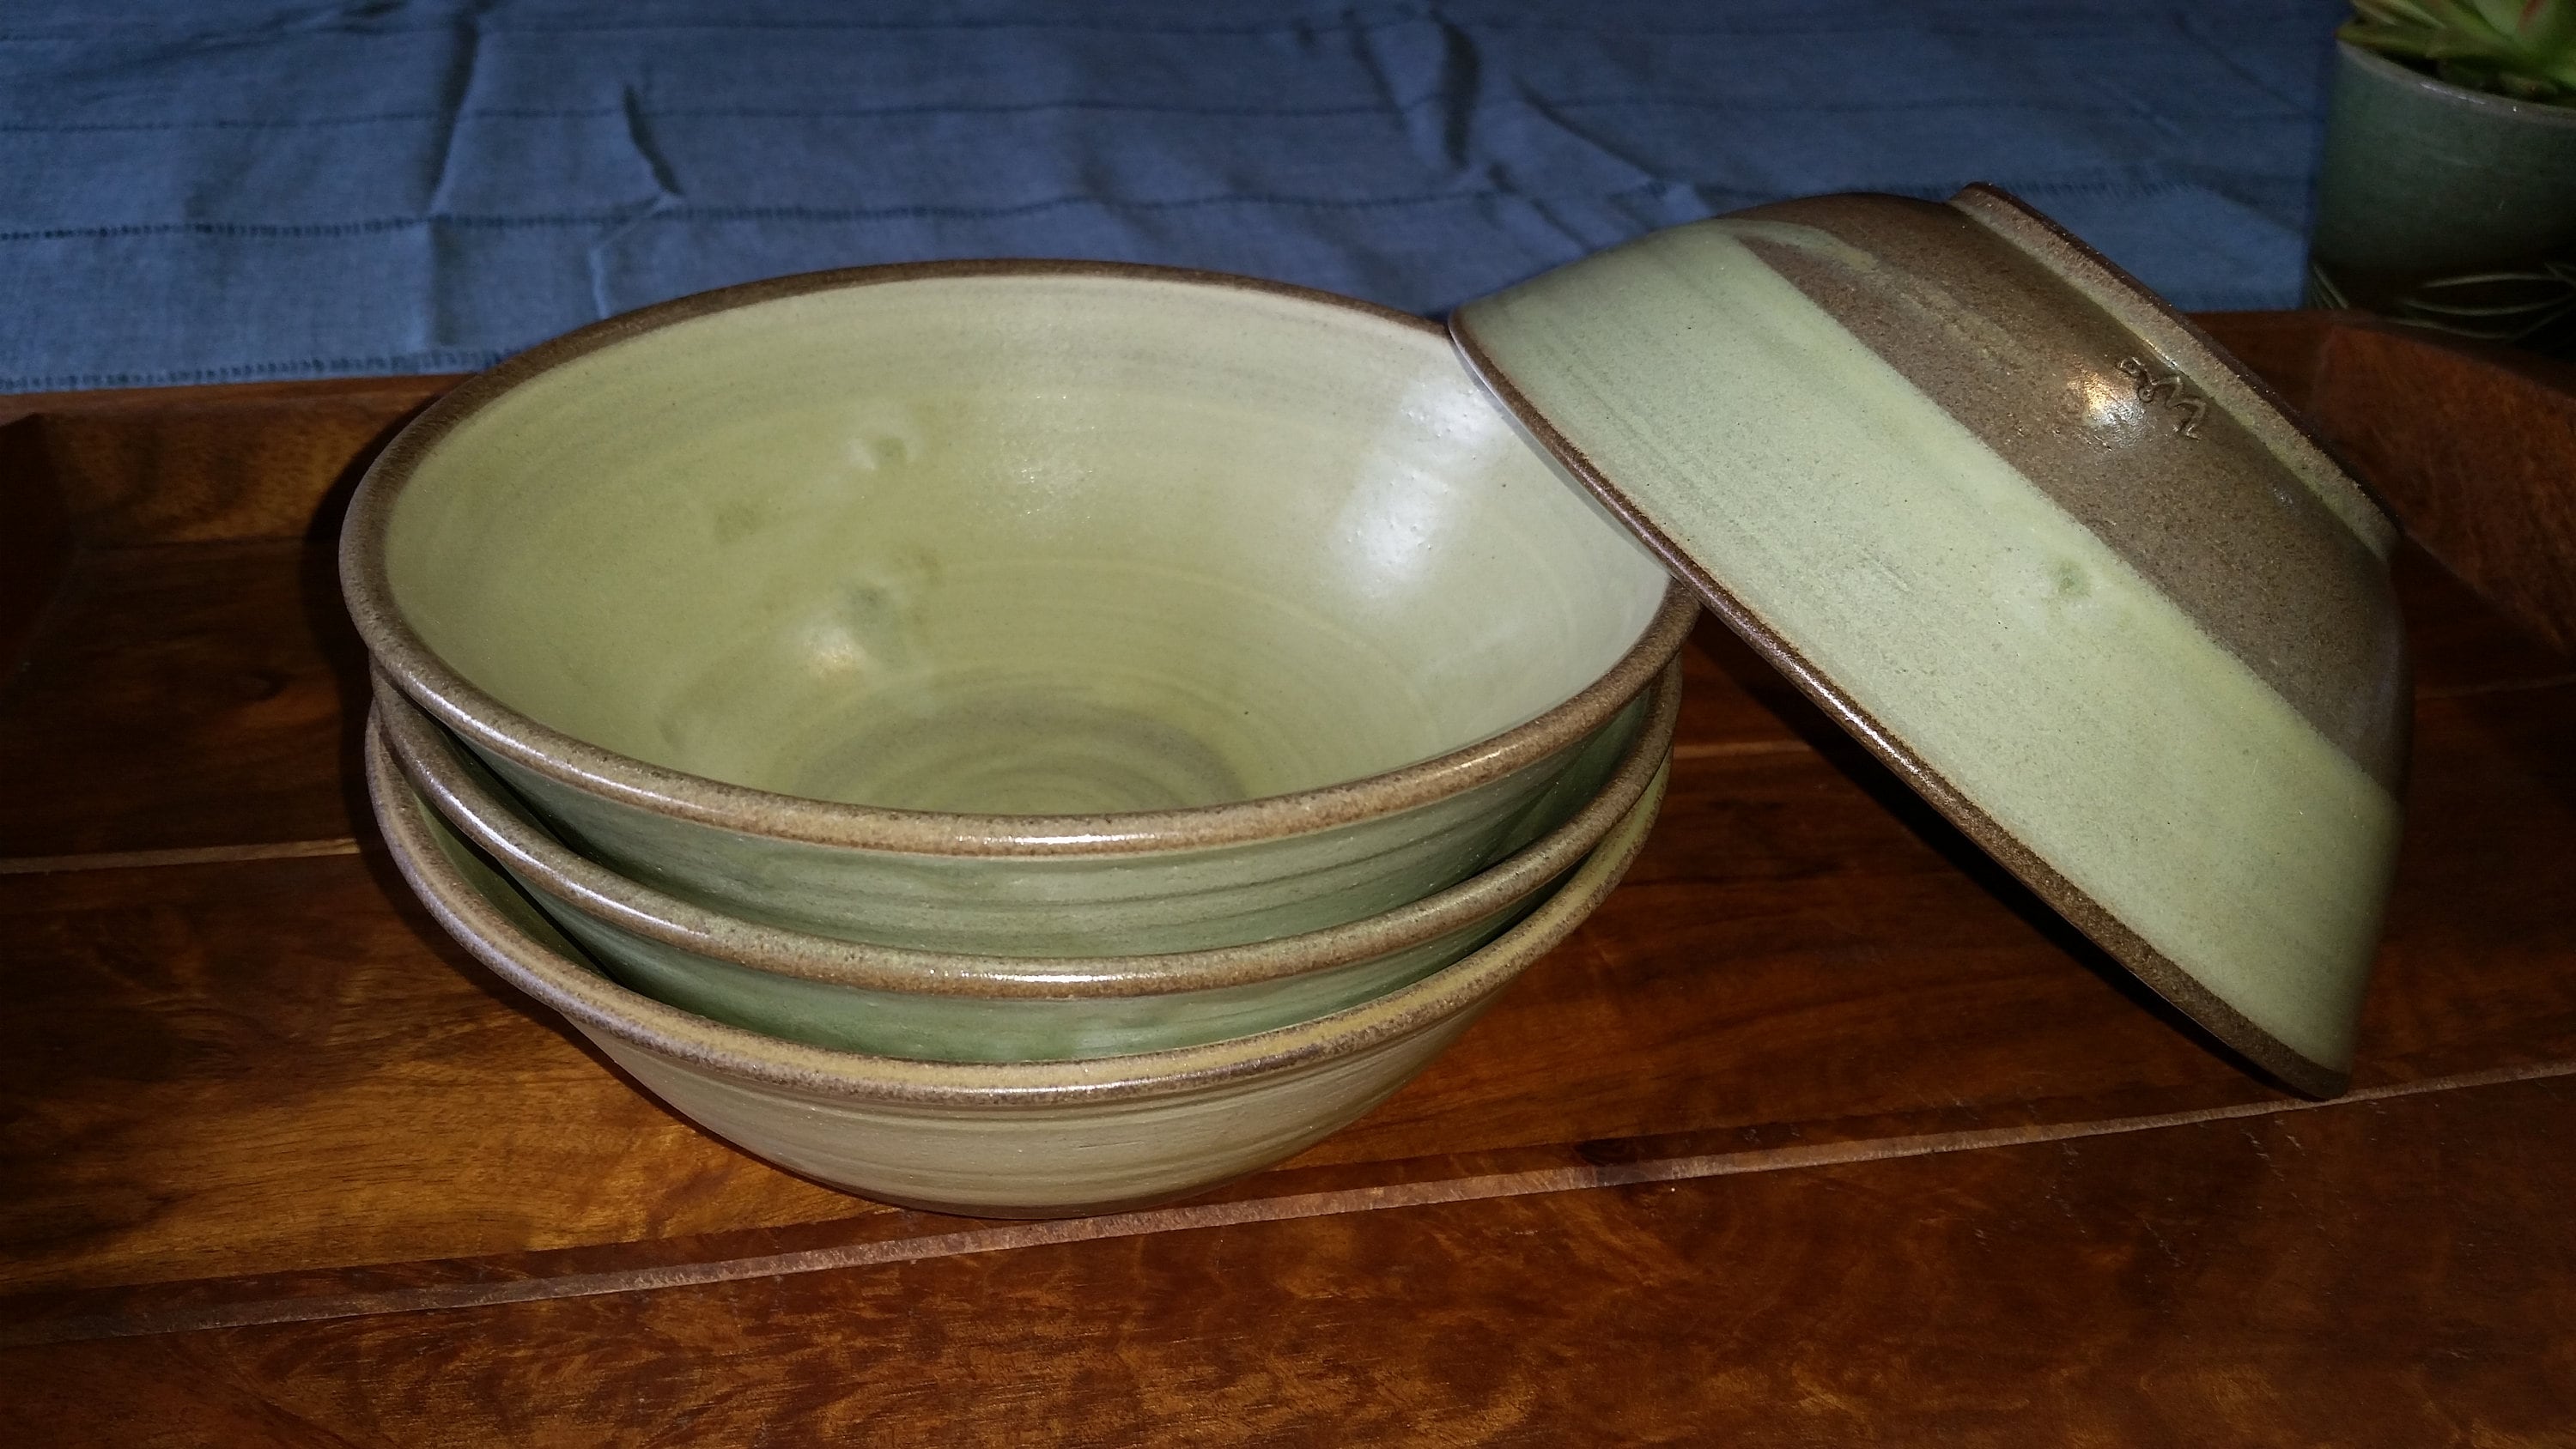 Wheel-Thrown, Rustic Stoneware Olive Green Ramen Noodle Bowls, Soup Cereal Salad Bowls. Set Of 4 - Ready To Ship